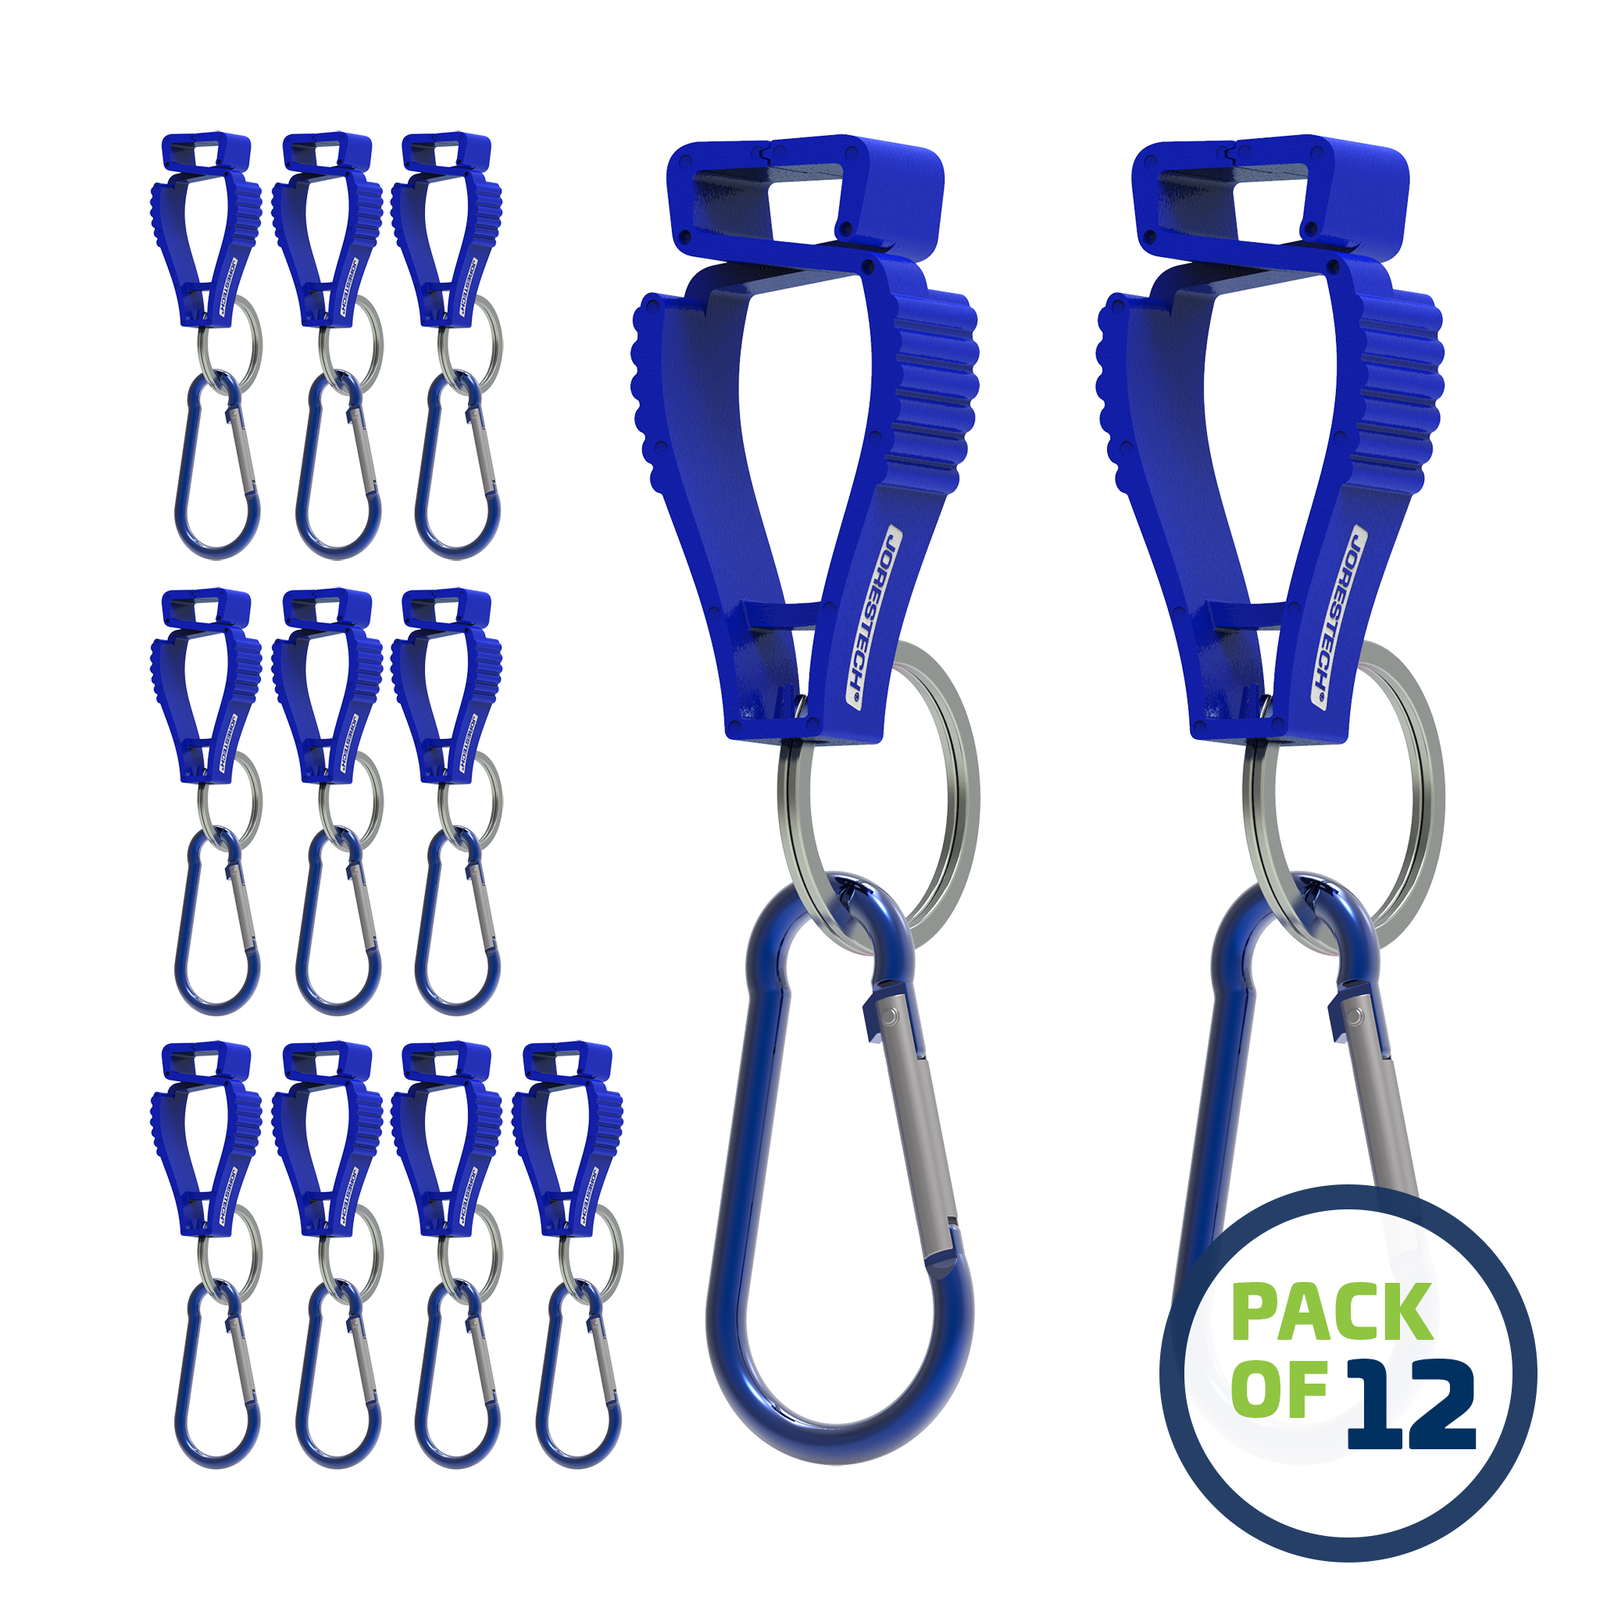 Pack of 12 Blue JORESTECH glove clip safety holders with carabiner